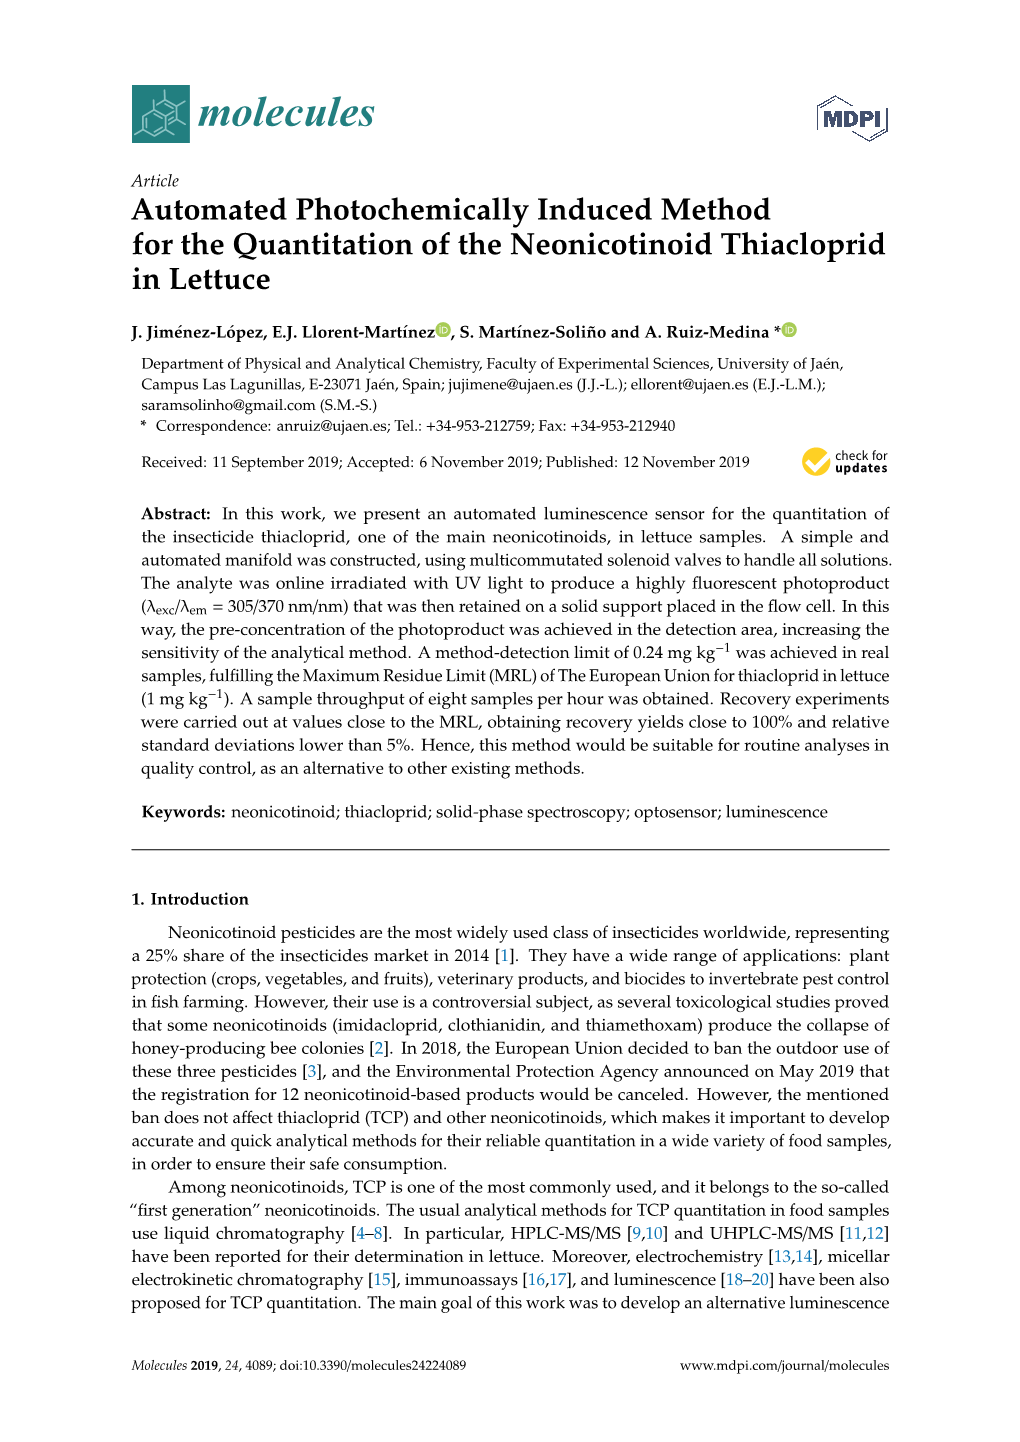 Automated Photochemically Induced Method for the Quantitation of the Neonicotinoid Thiacloprid in Lettuce